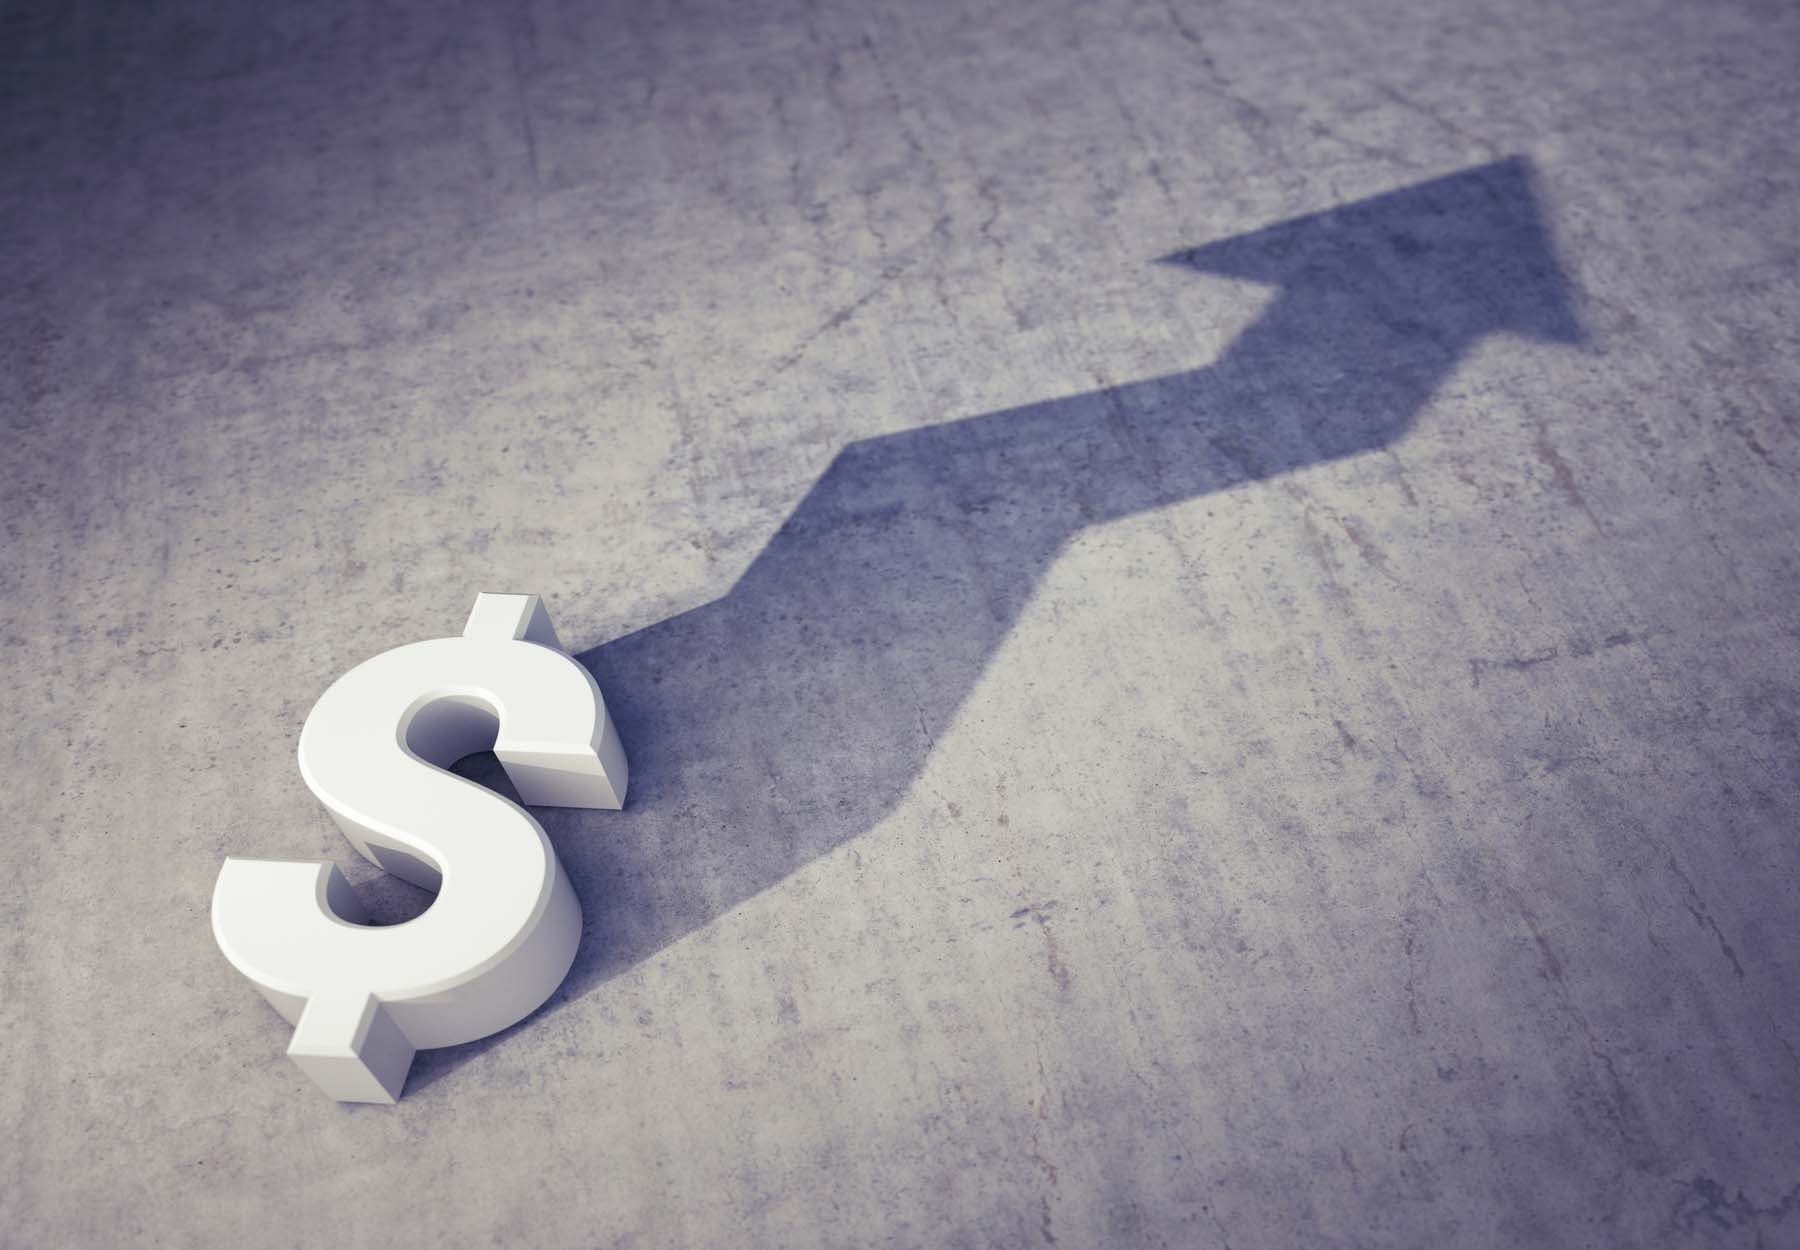 A white dollar sign on a grey background with the shadow of a rising arrow to illustrate rising costs or recoveries.